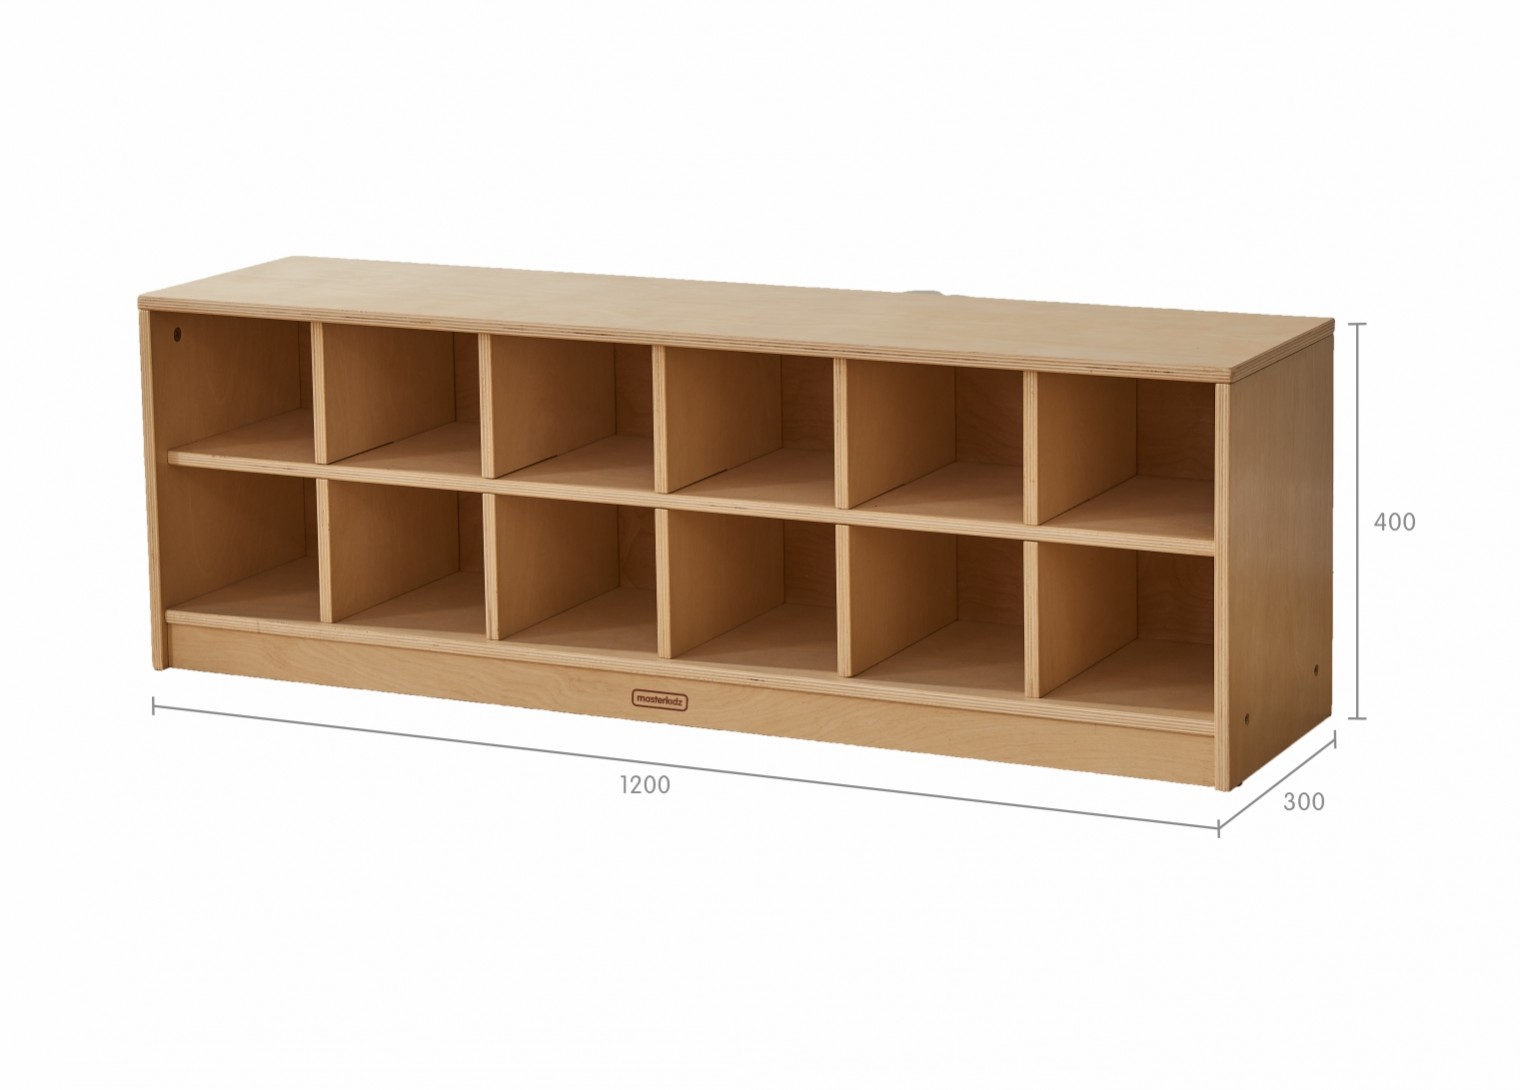 1200L 12-Compartment Shoe Bench - Plywood